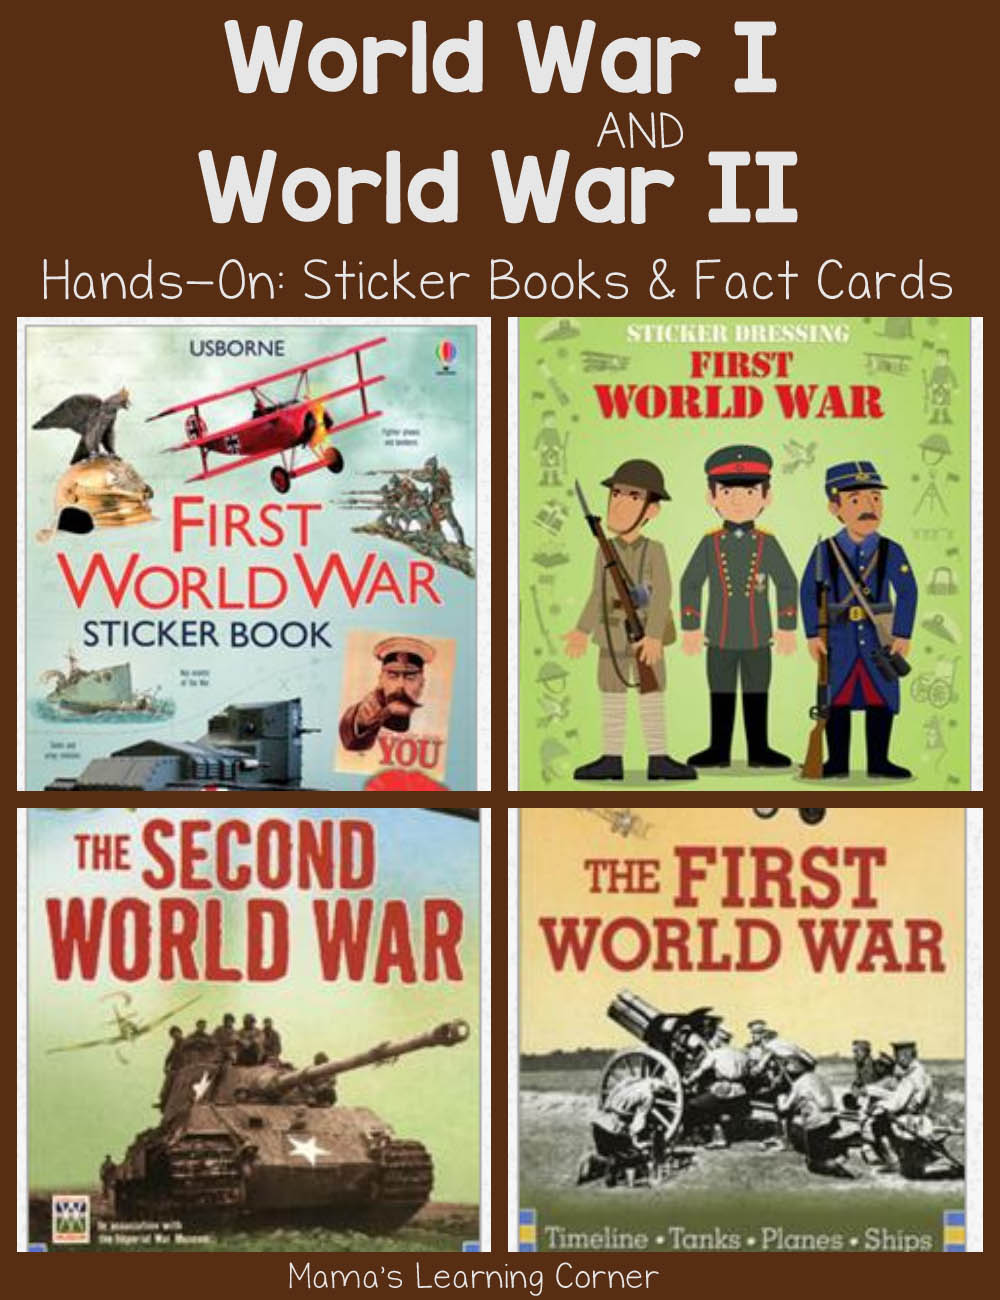 World War I and World War II Hands-on Resources: Sticker Books and Fact Cards